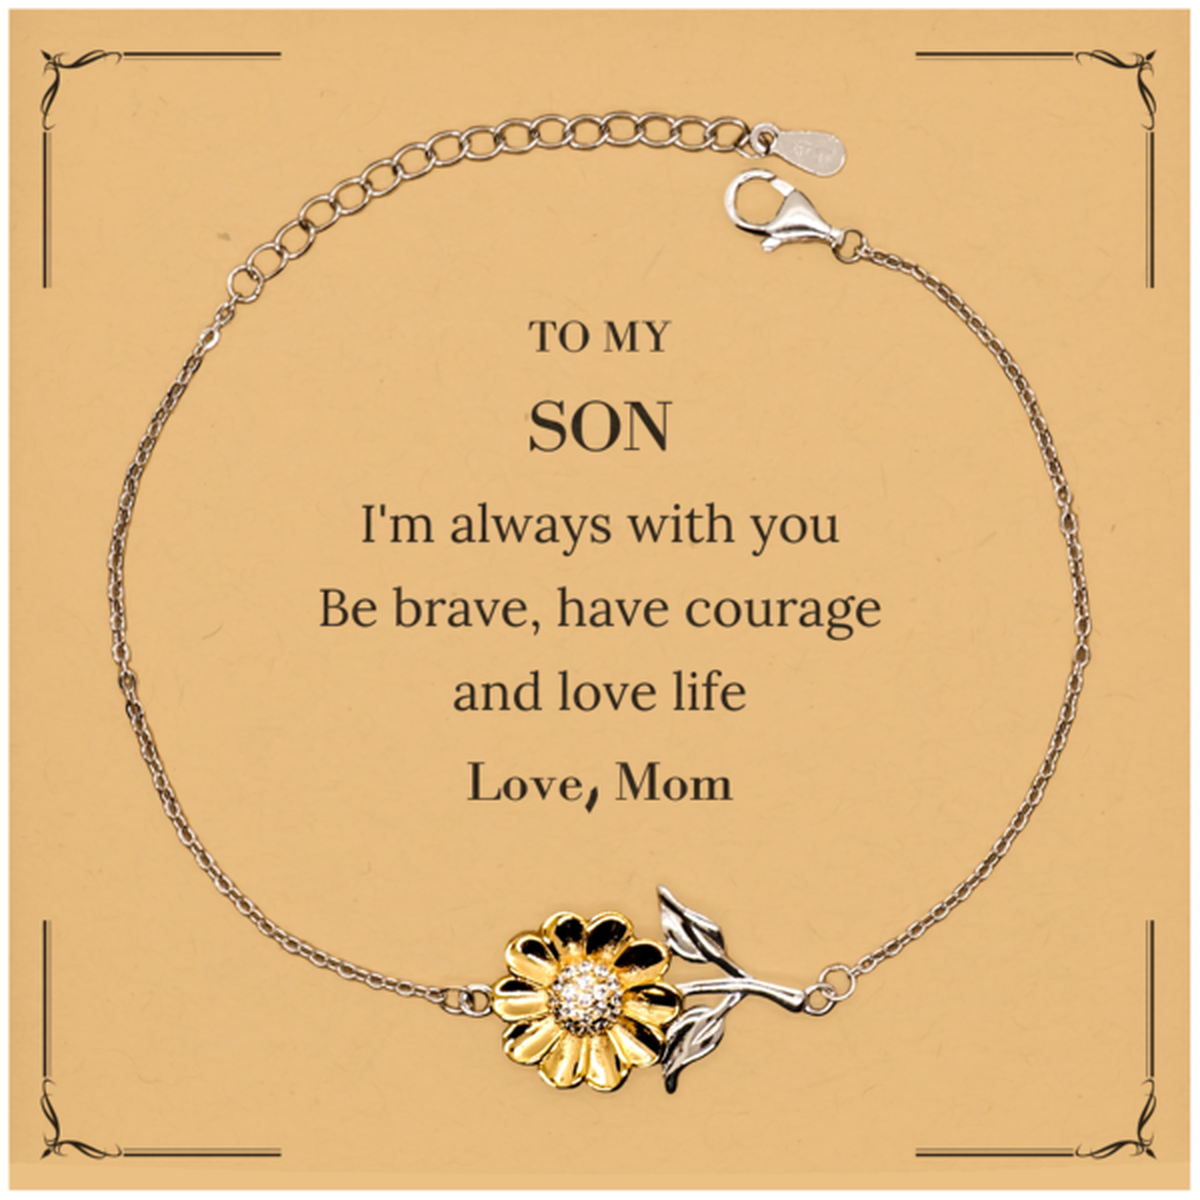 To My Son Gifts from Mom, Unique Sunflower Bracelet Inspirational Christmas Birthday Graduation Gifts for Son I'm always with you. Be brave, have courage and love life. Love, Mom